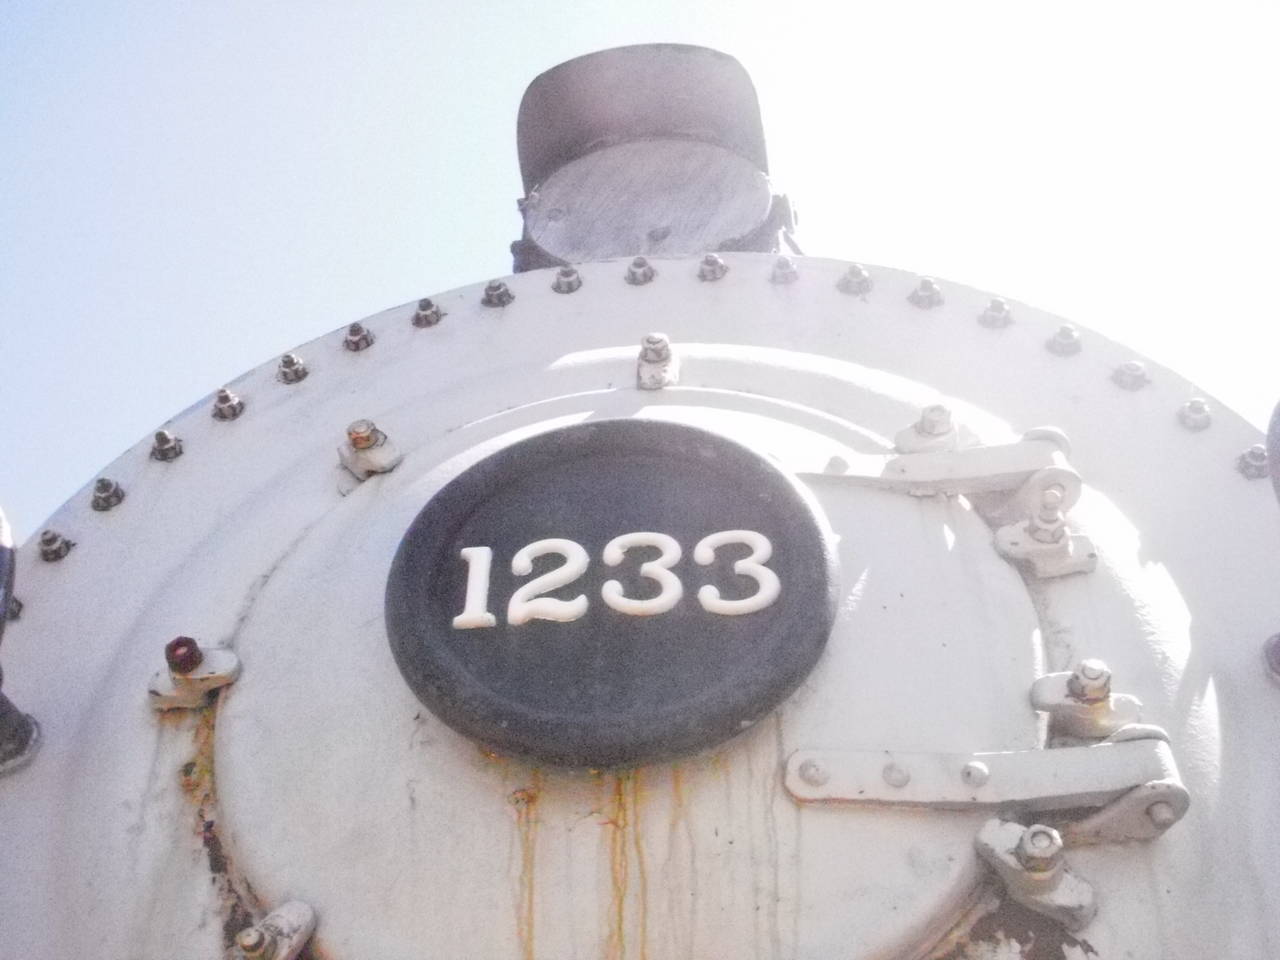 Southern Pacific S-10 1233